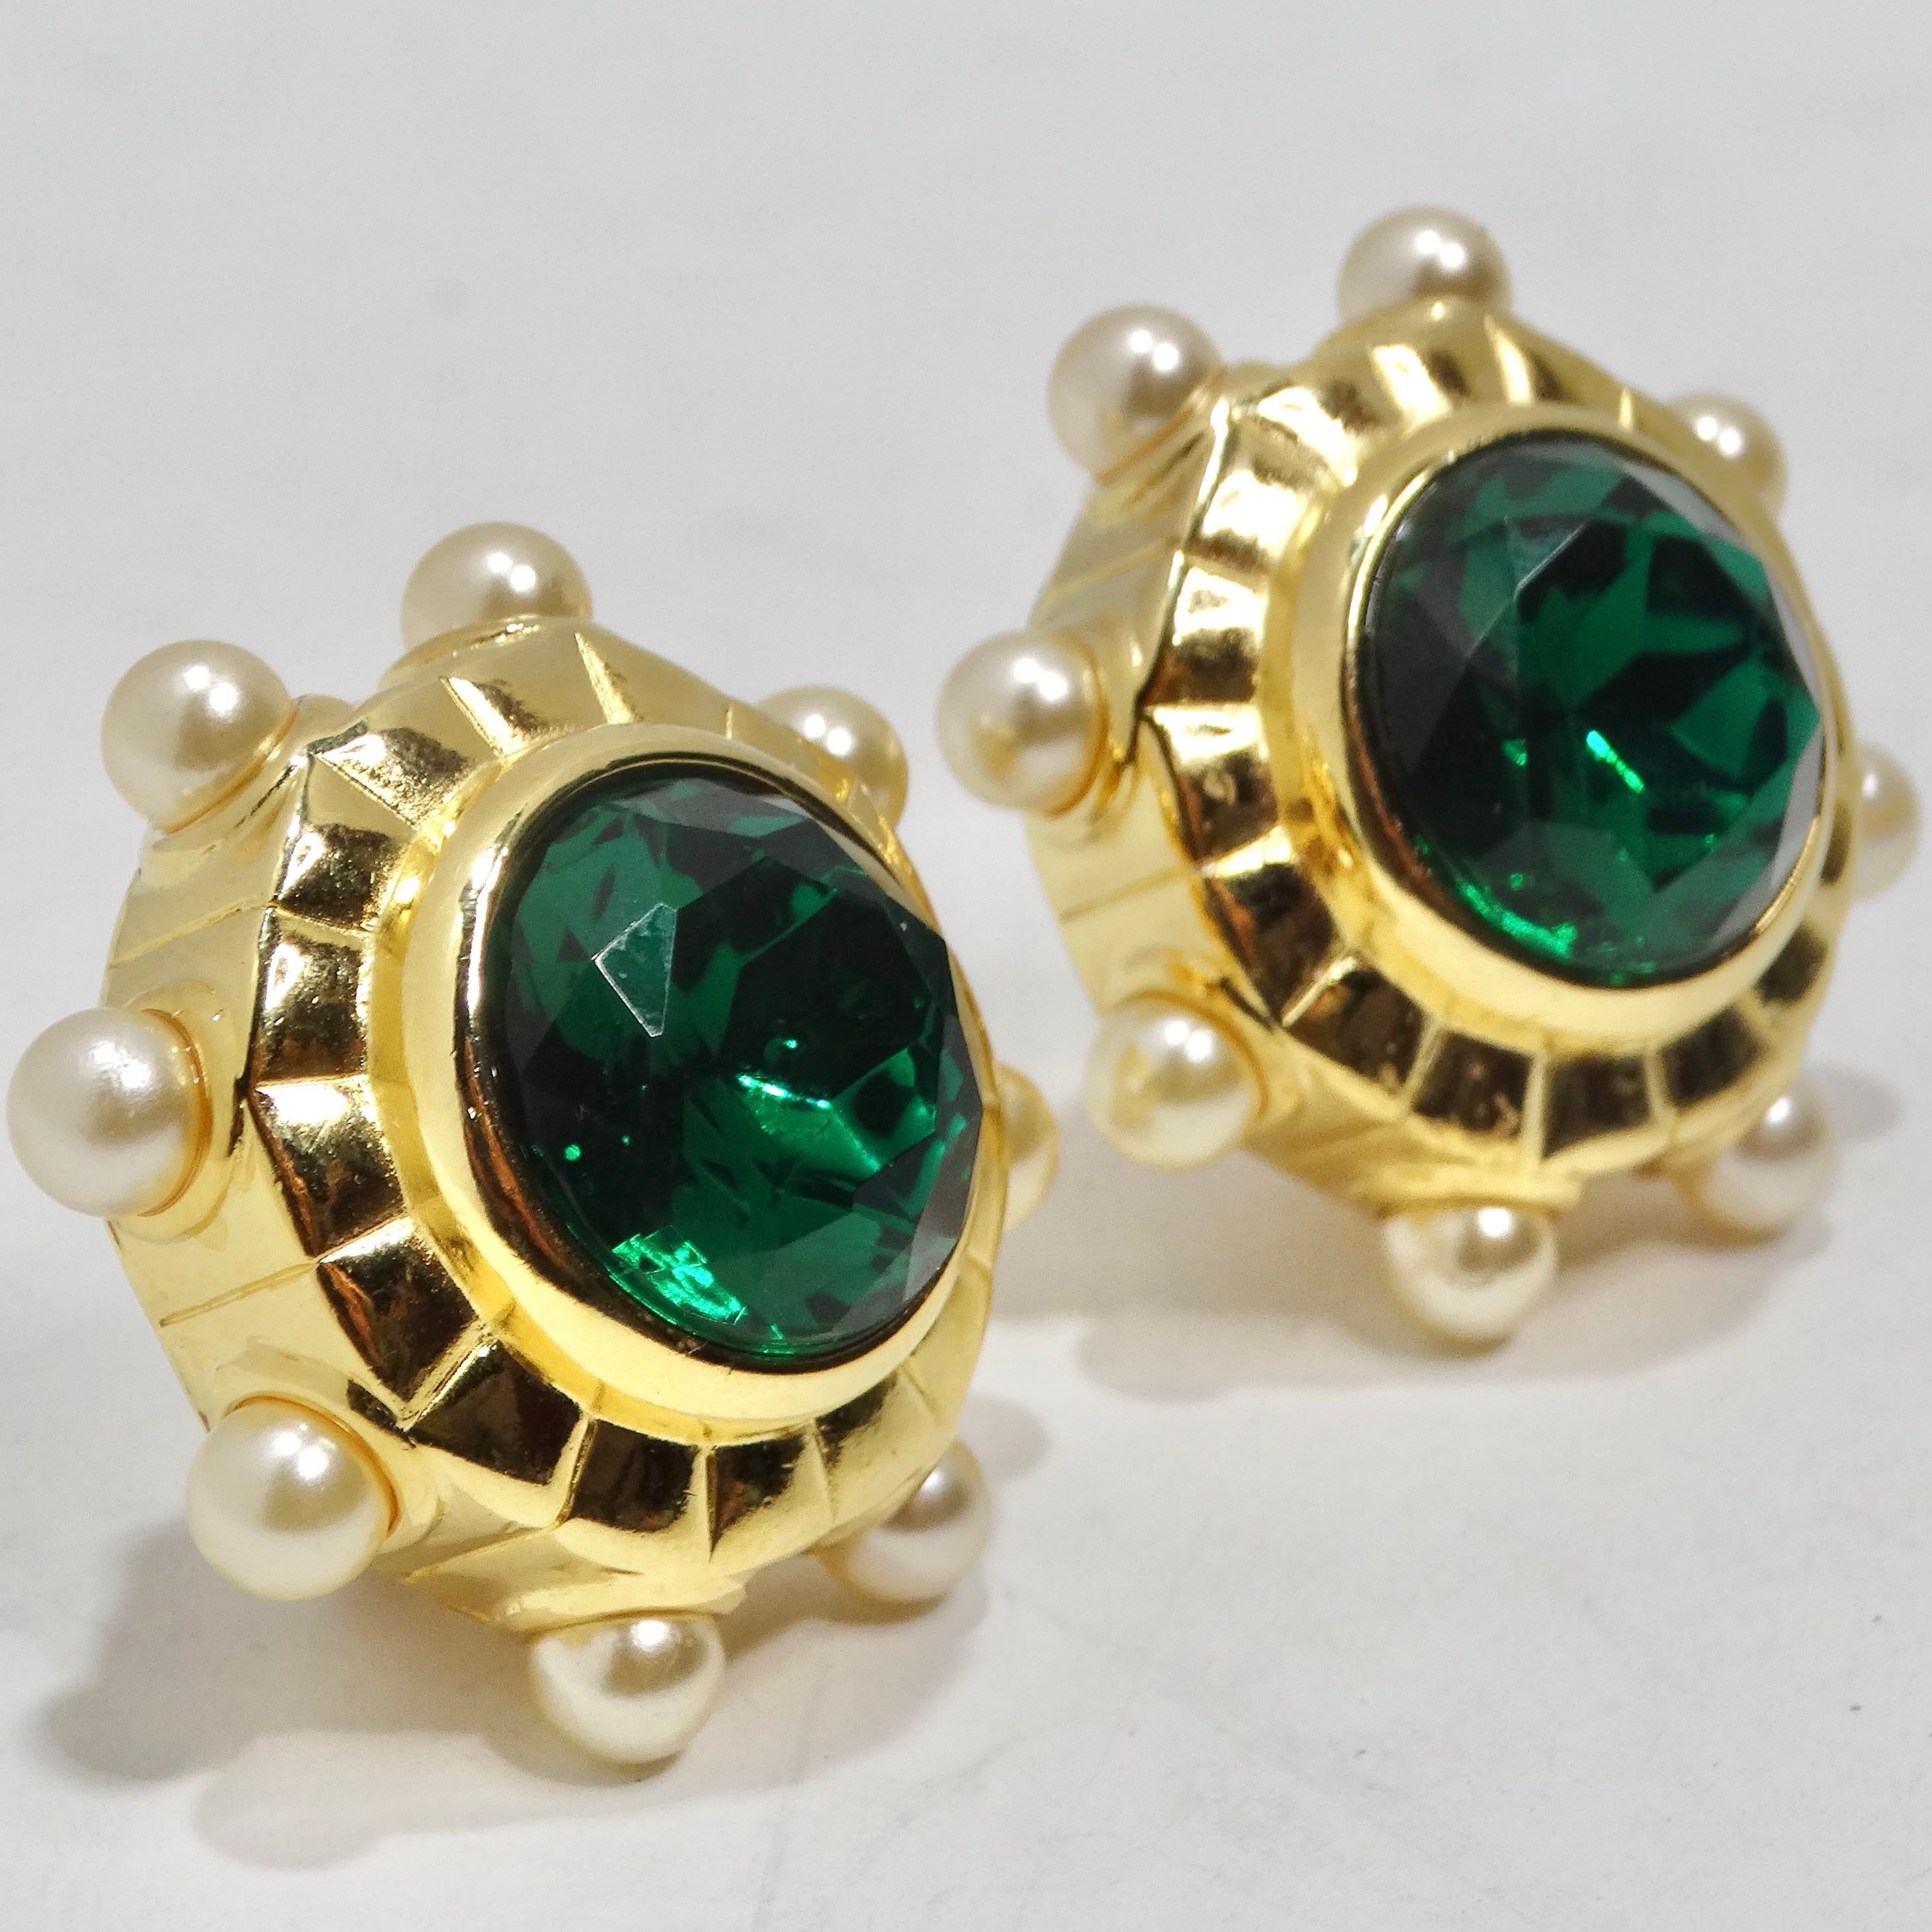 Sandra Miller Burrows 1980s Gold Tone Green Gem Pearl Clip On Earrings In Excellent Condition For Sale In Scottsdale, AZ